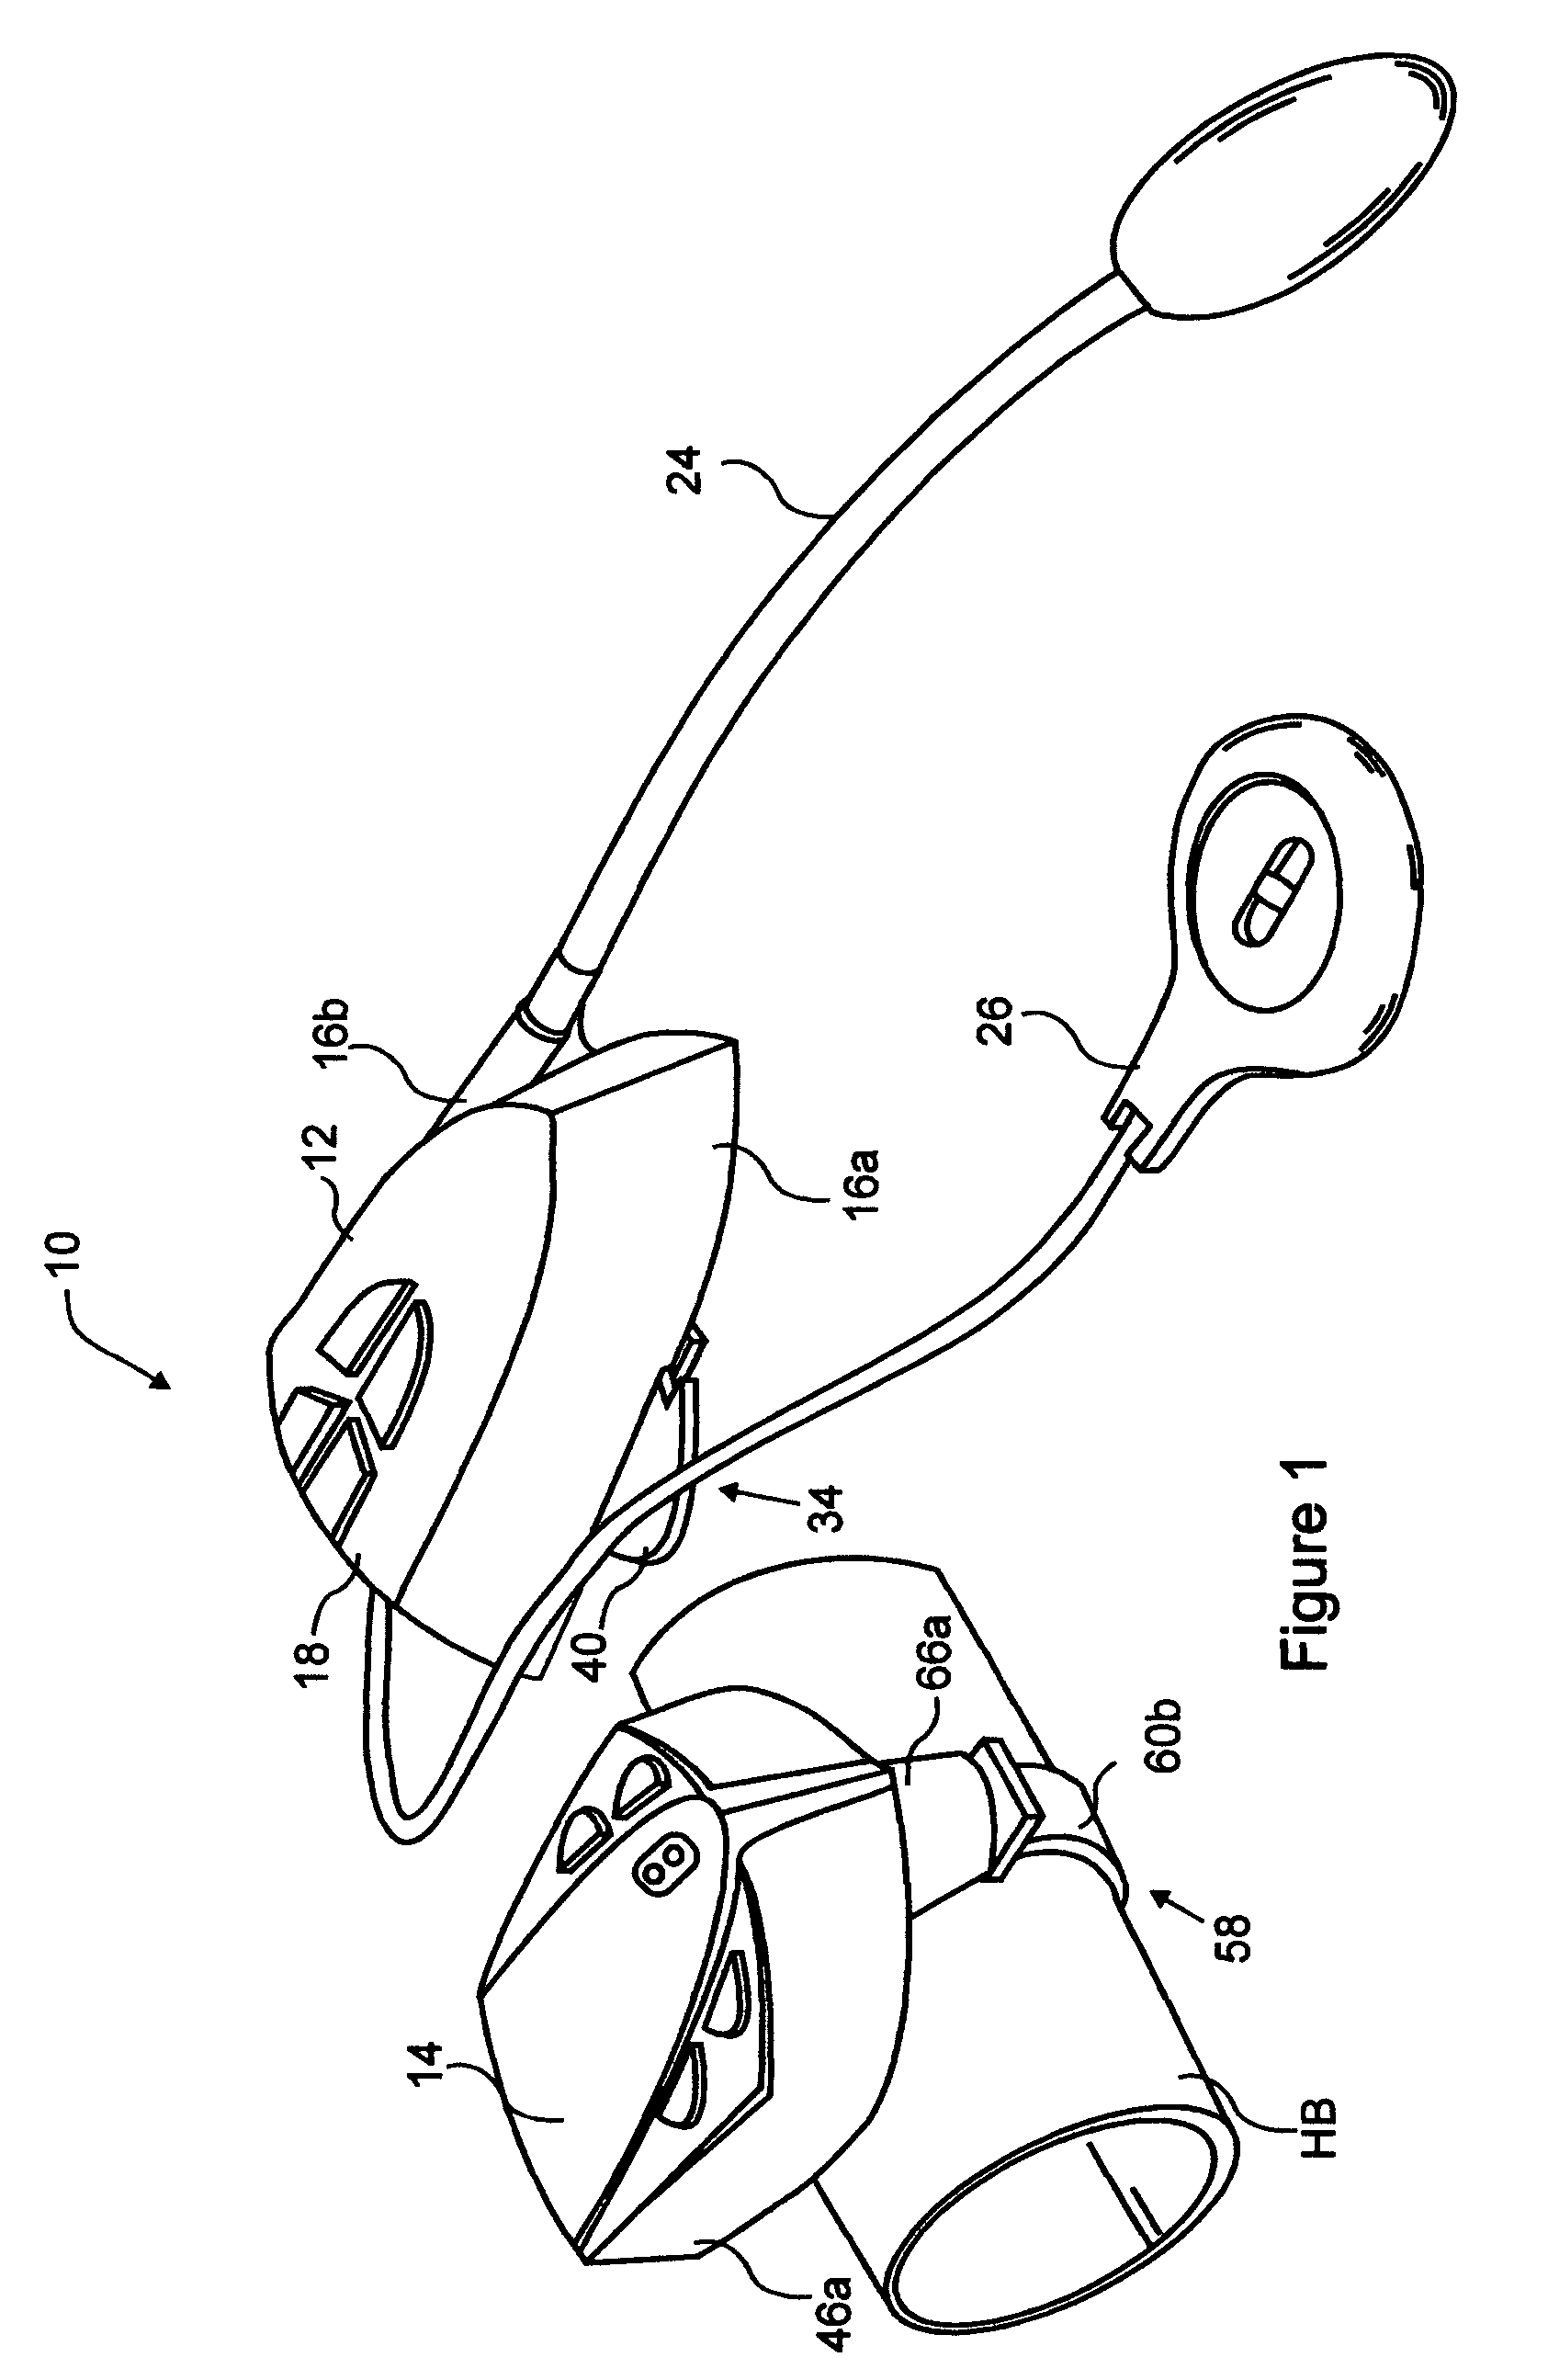 Communication and/or entertainment system for use in a head protective device